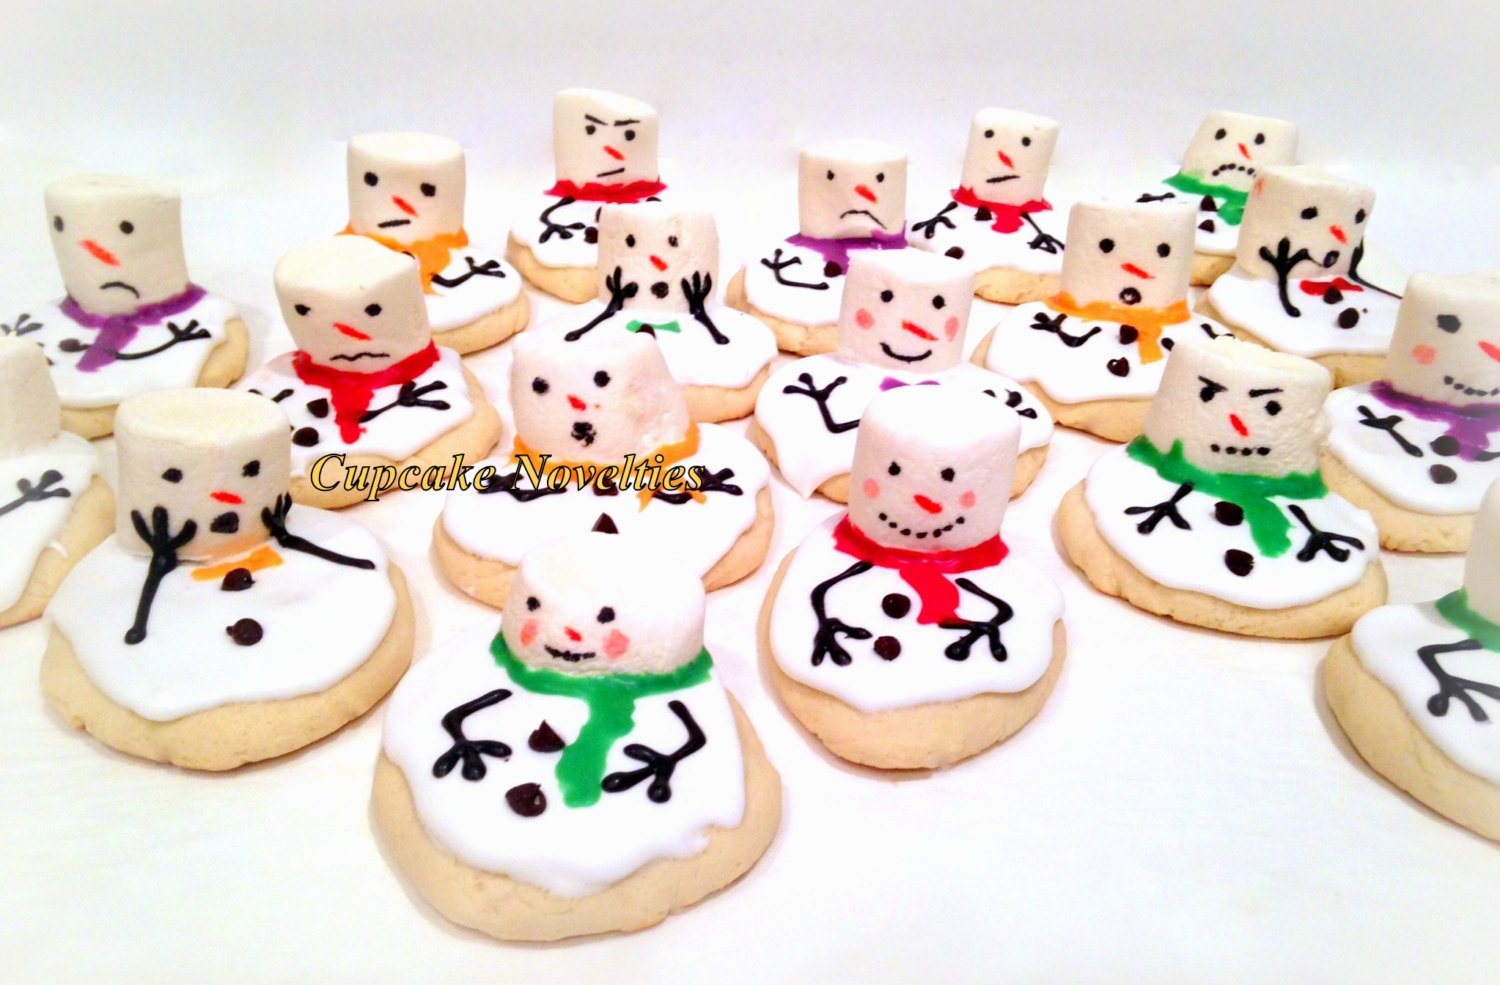 Stocking Stuffers Christmas Cookies Holiday Cookies Melting Snowman Cookies Classroom Party Cookie for Santa Olaf Cookies Frosty The Snowman